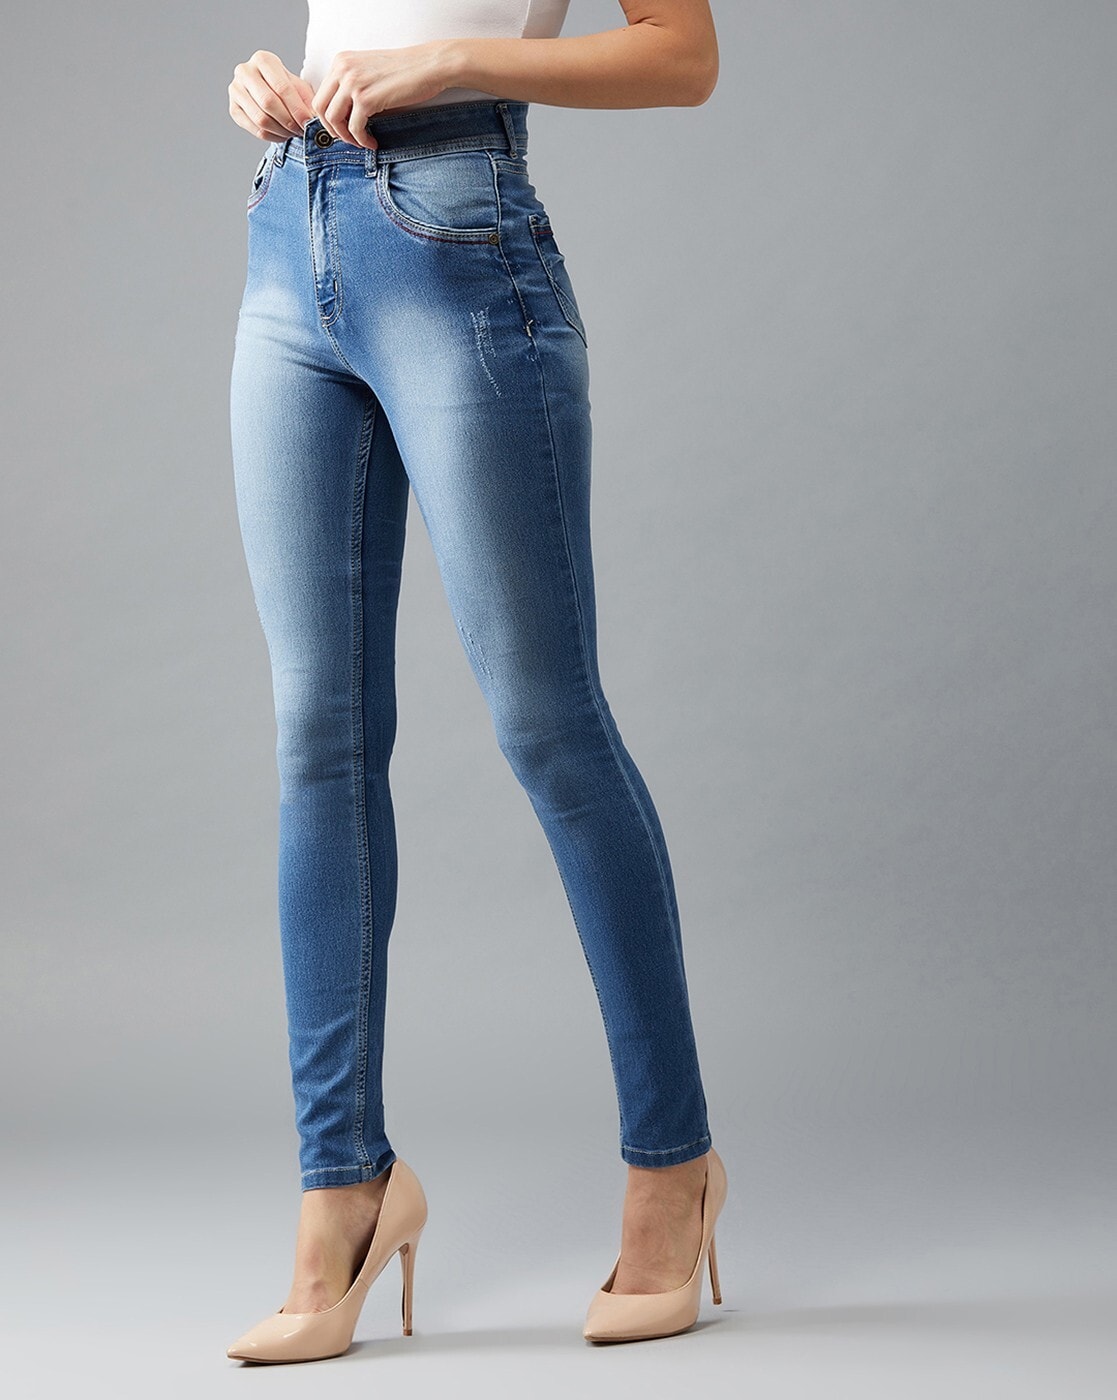 Discover more than 212 denim skinny jeans for women best